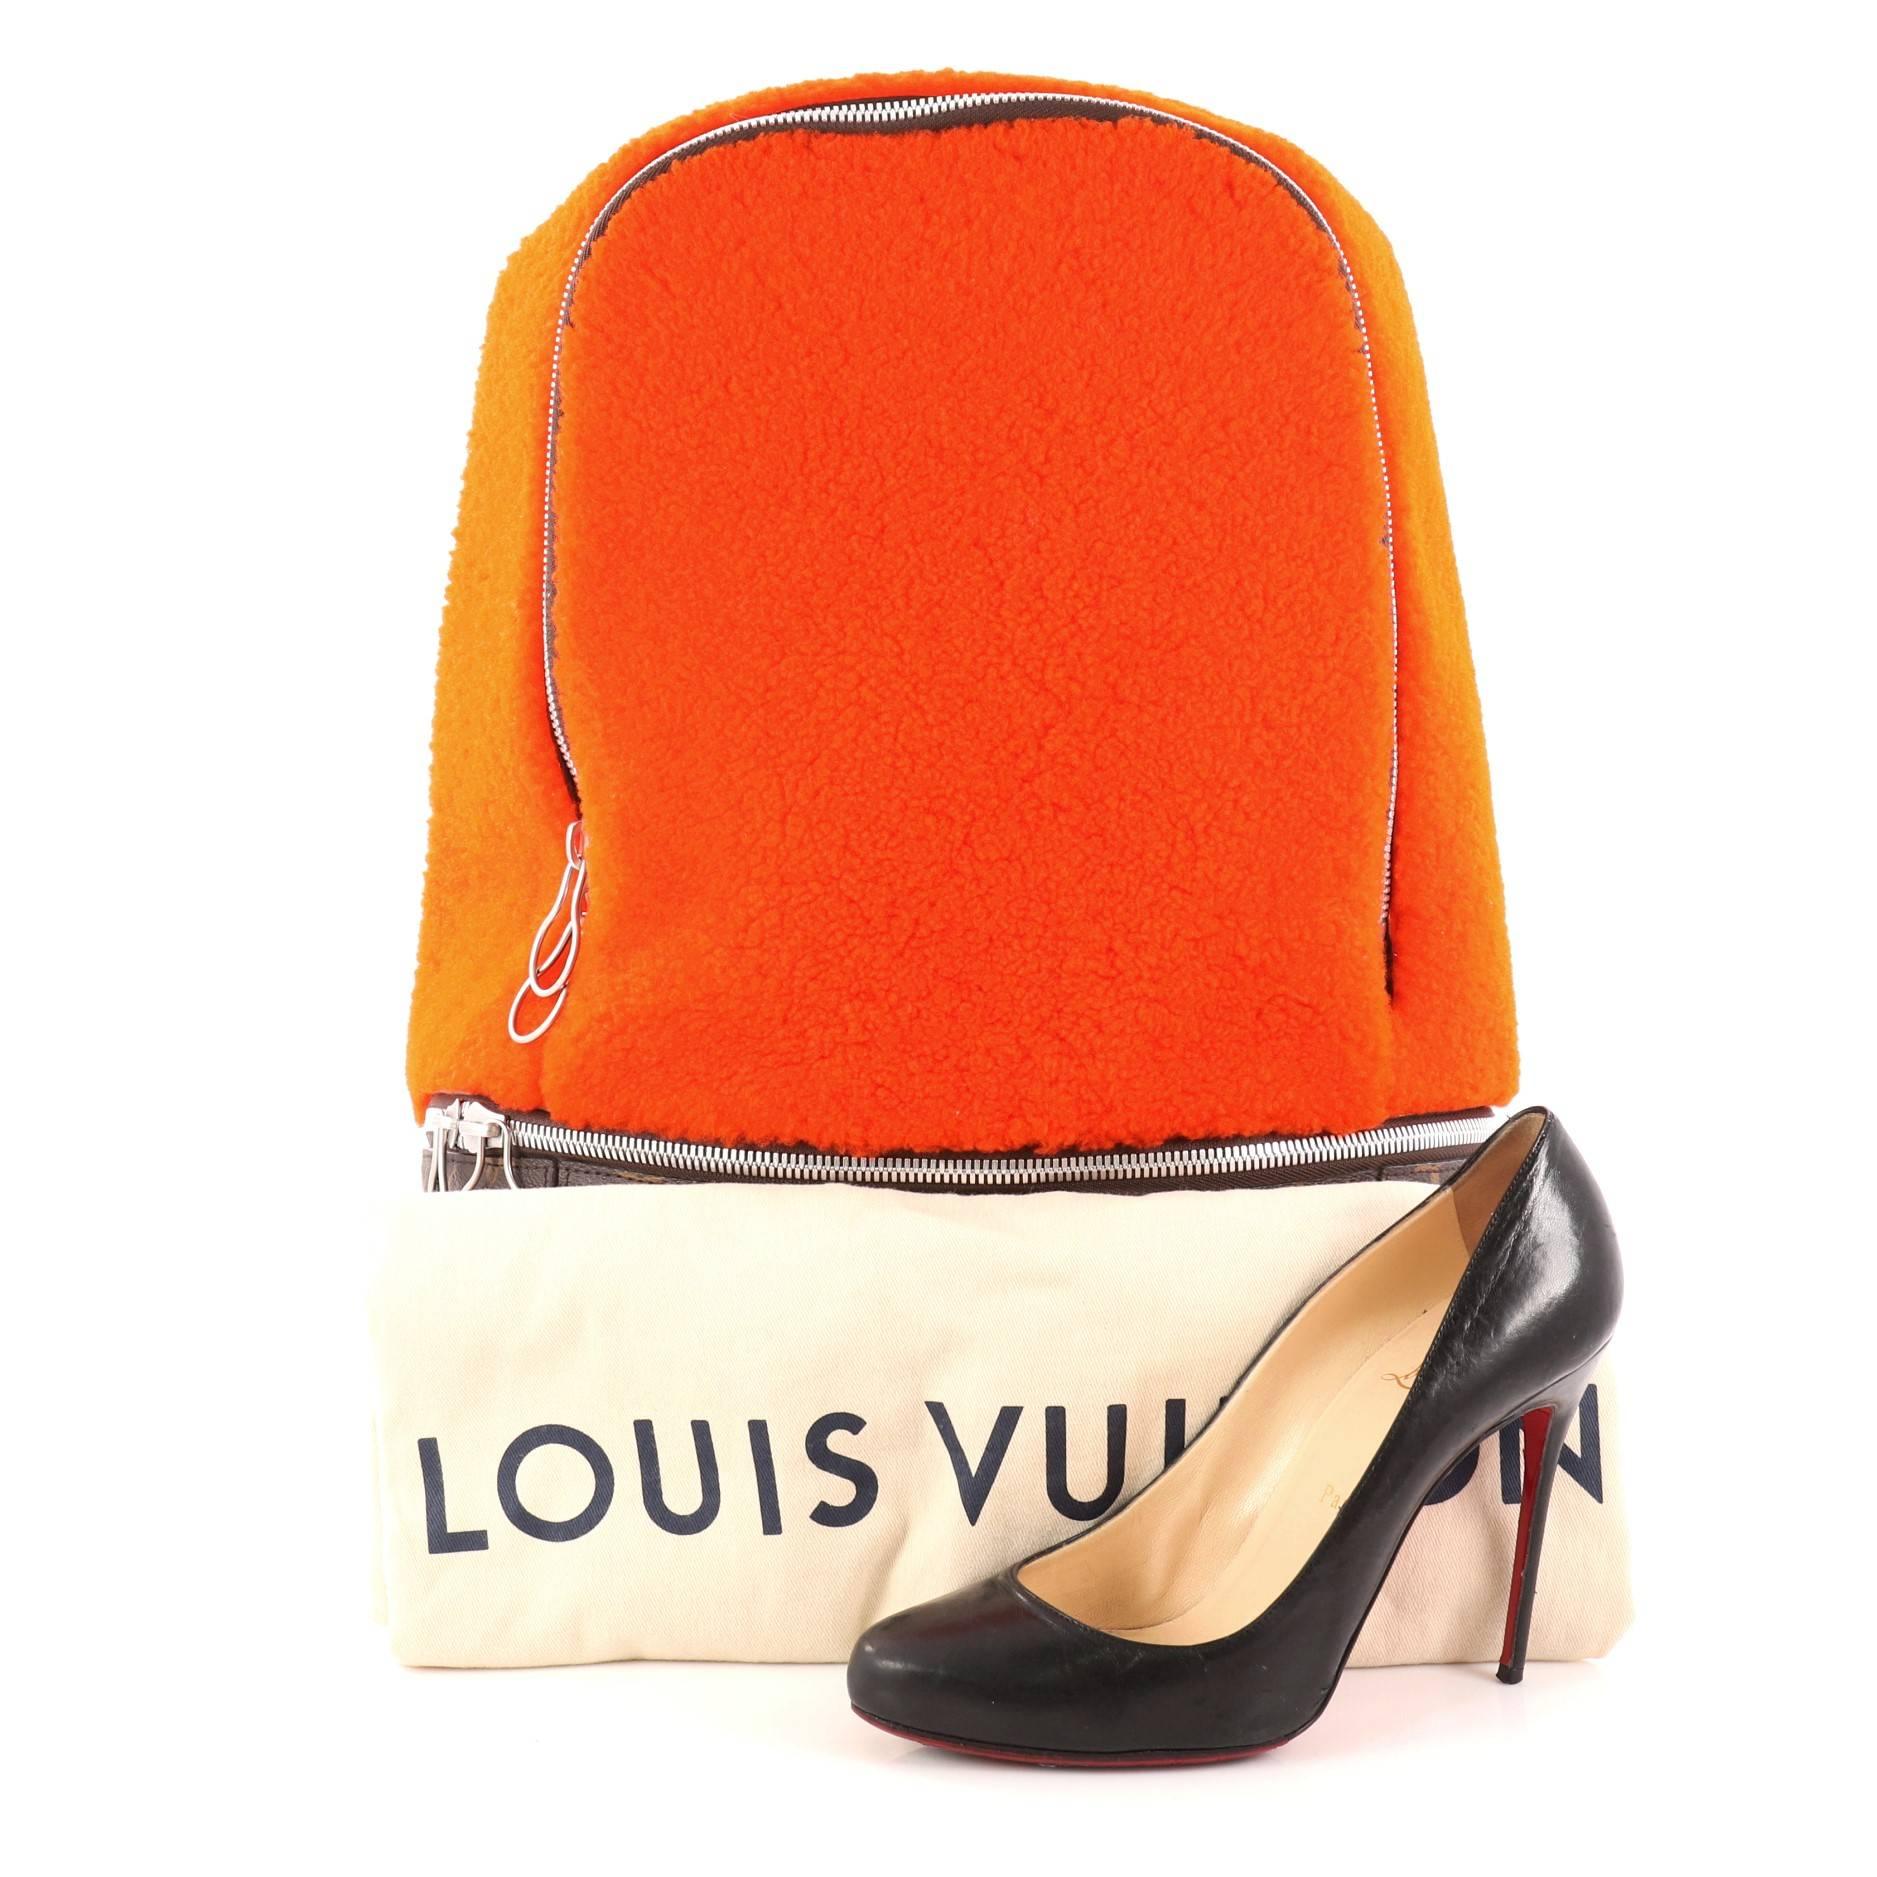 This authentic Louis Vuitton Limited Edition Marc Newson Backpack Shearling and Monogram Canvas is a refined backpack that displays luxury and style. Crafted in orange shearling and brown monogram coated canvas, this bag features fleece shoulder